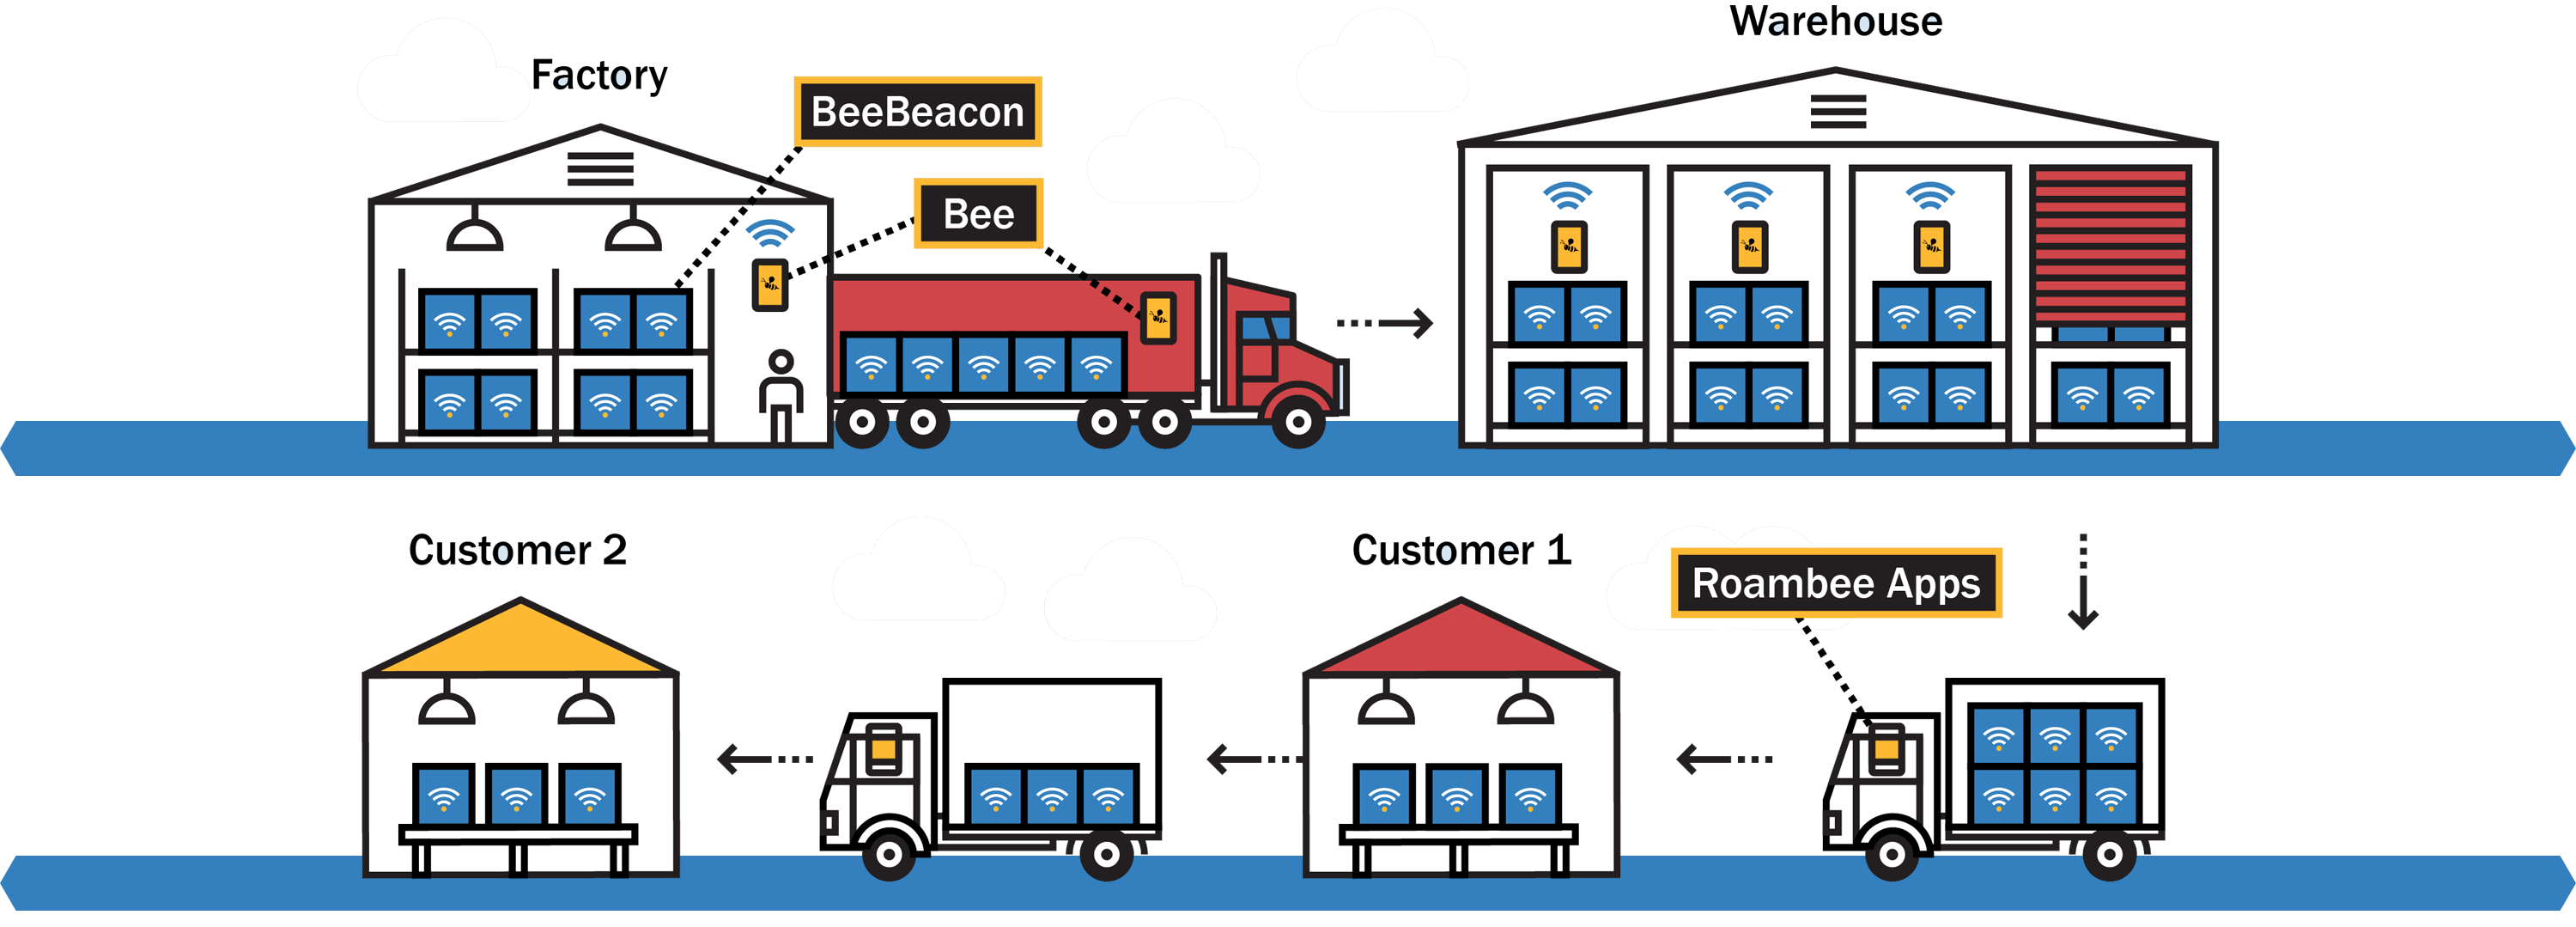 BeeBeacon's Real-Time Supply Chain Solution